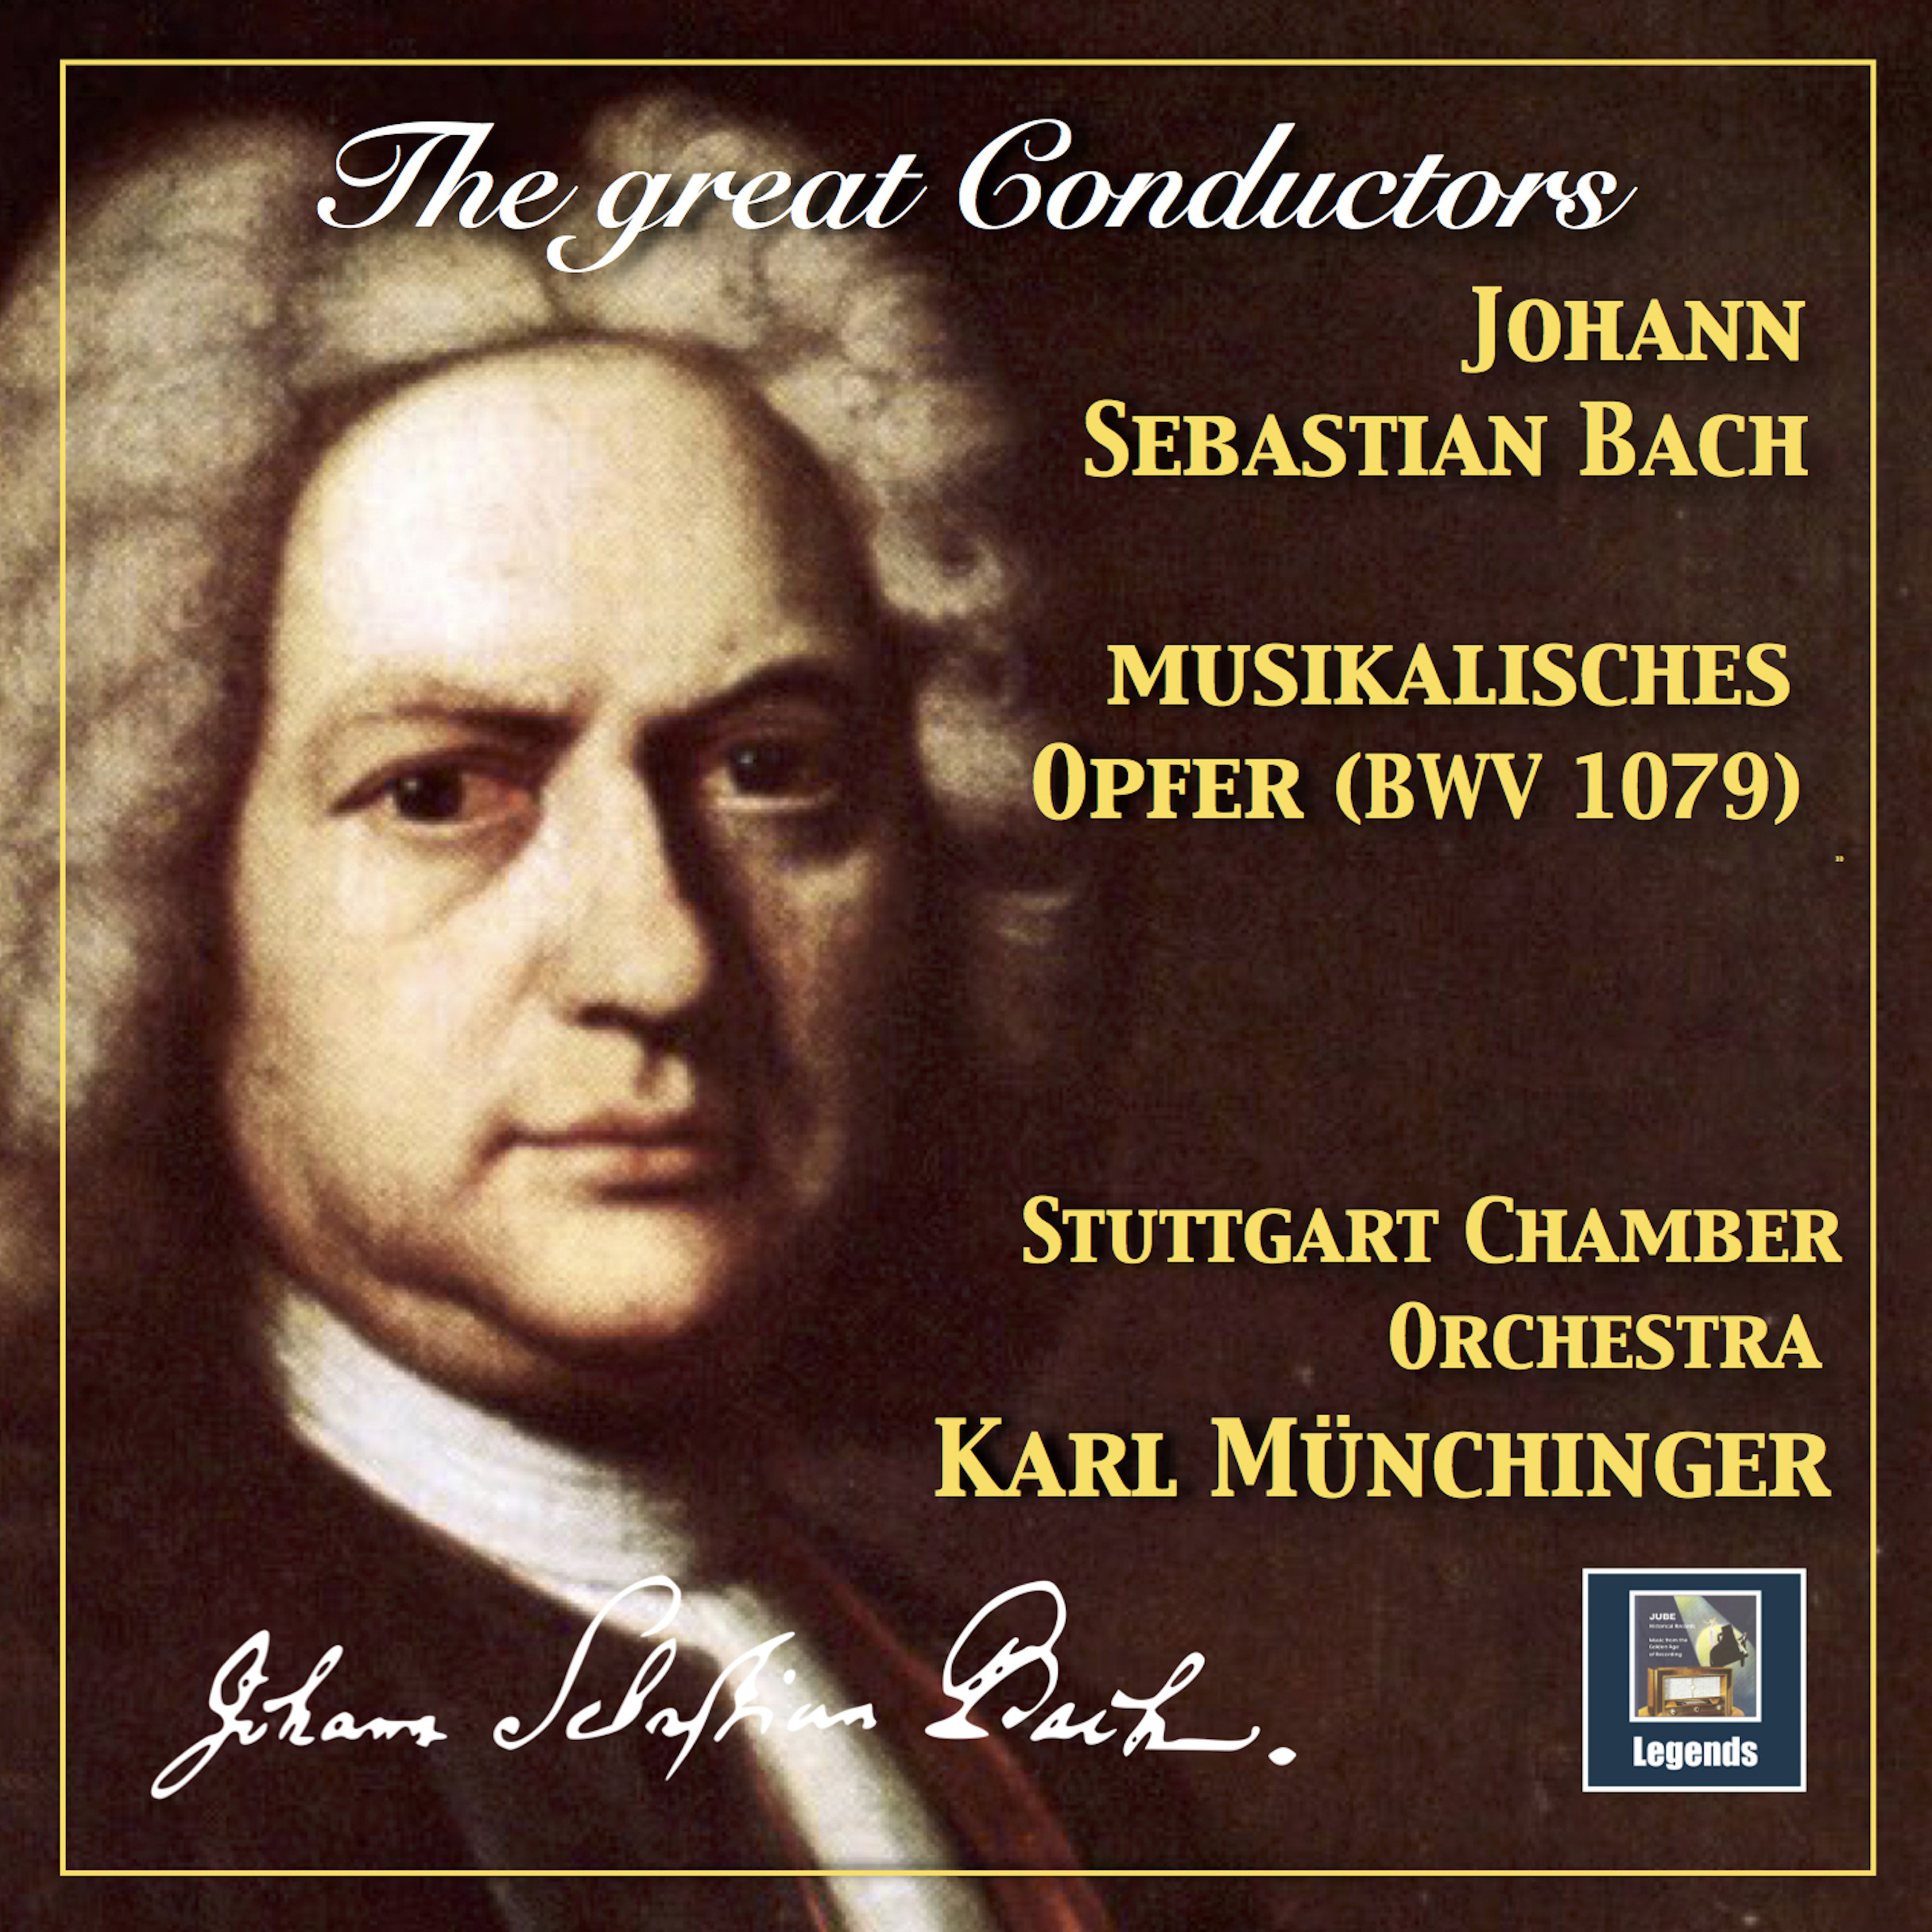 Musikalisches Opfer, BWV 1079 (Arr. K. Münchinger for Chamber Orchestra): Ricercare à 6